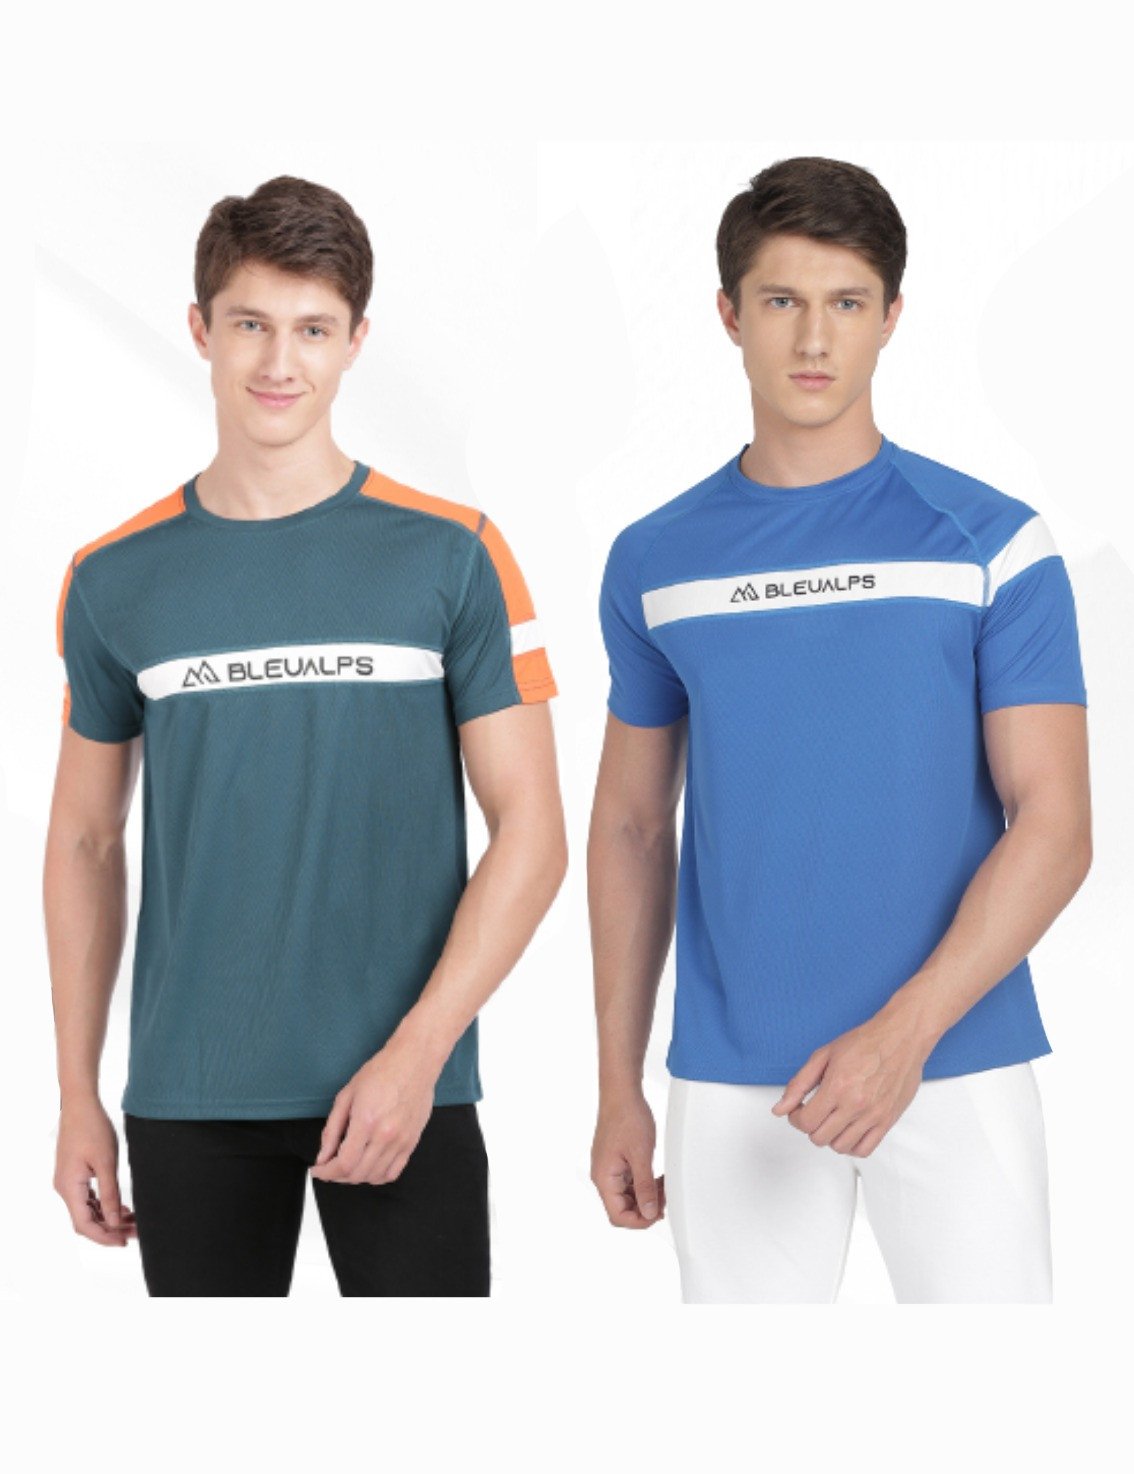 Bleualps Stylish Men's Activewear Sports Round Neck Half Sleeve T-Shirt Combo (Pack Of 2) - Multicolour | Gents Workout T-Shirts (2 in 1)